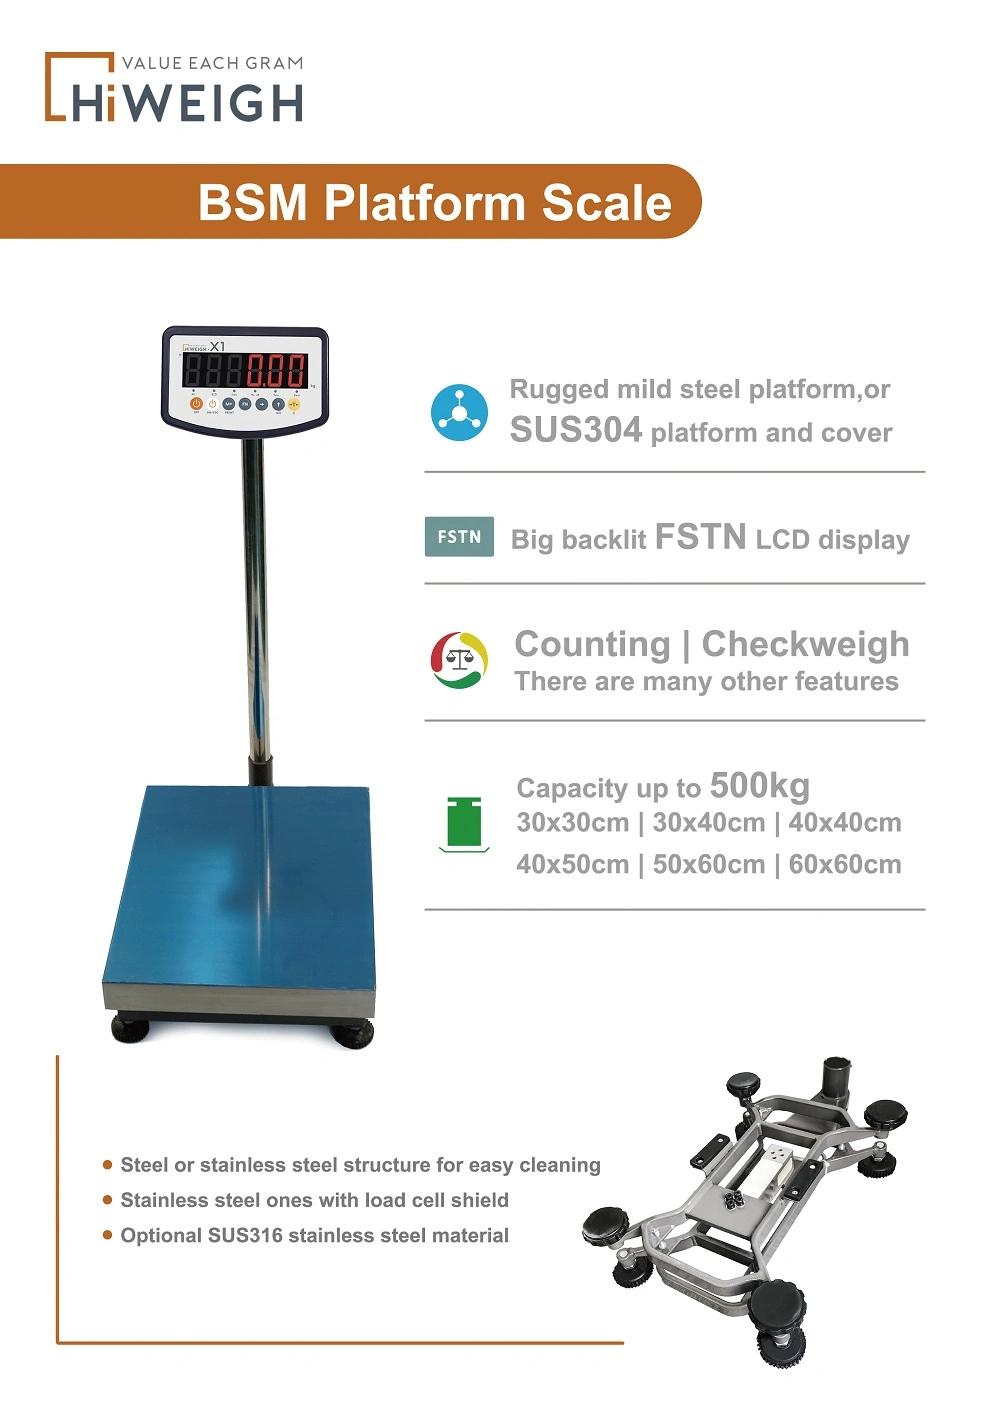 Tcs 150kg 500kg Digital Wireless Food Platform Weighing Scale for Heavy Goods